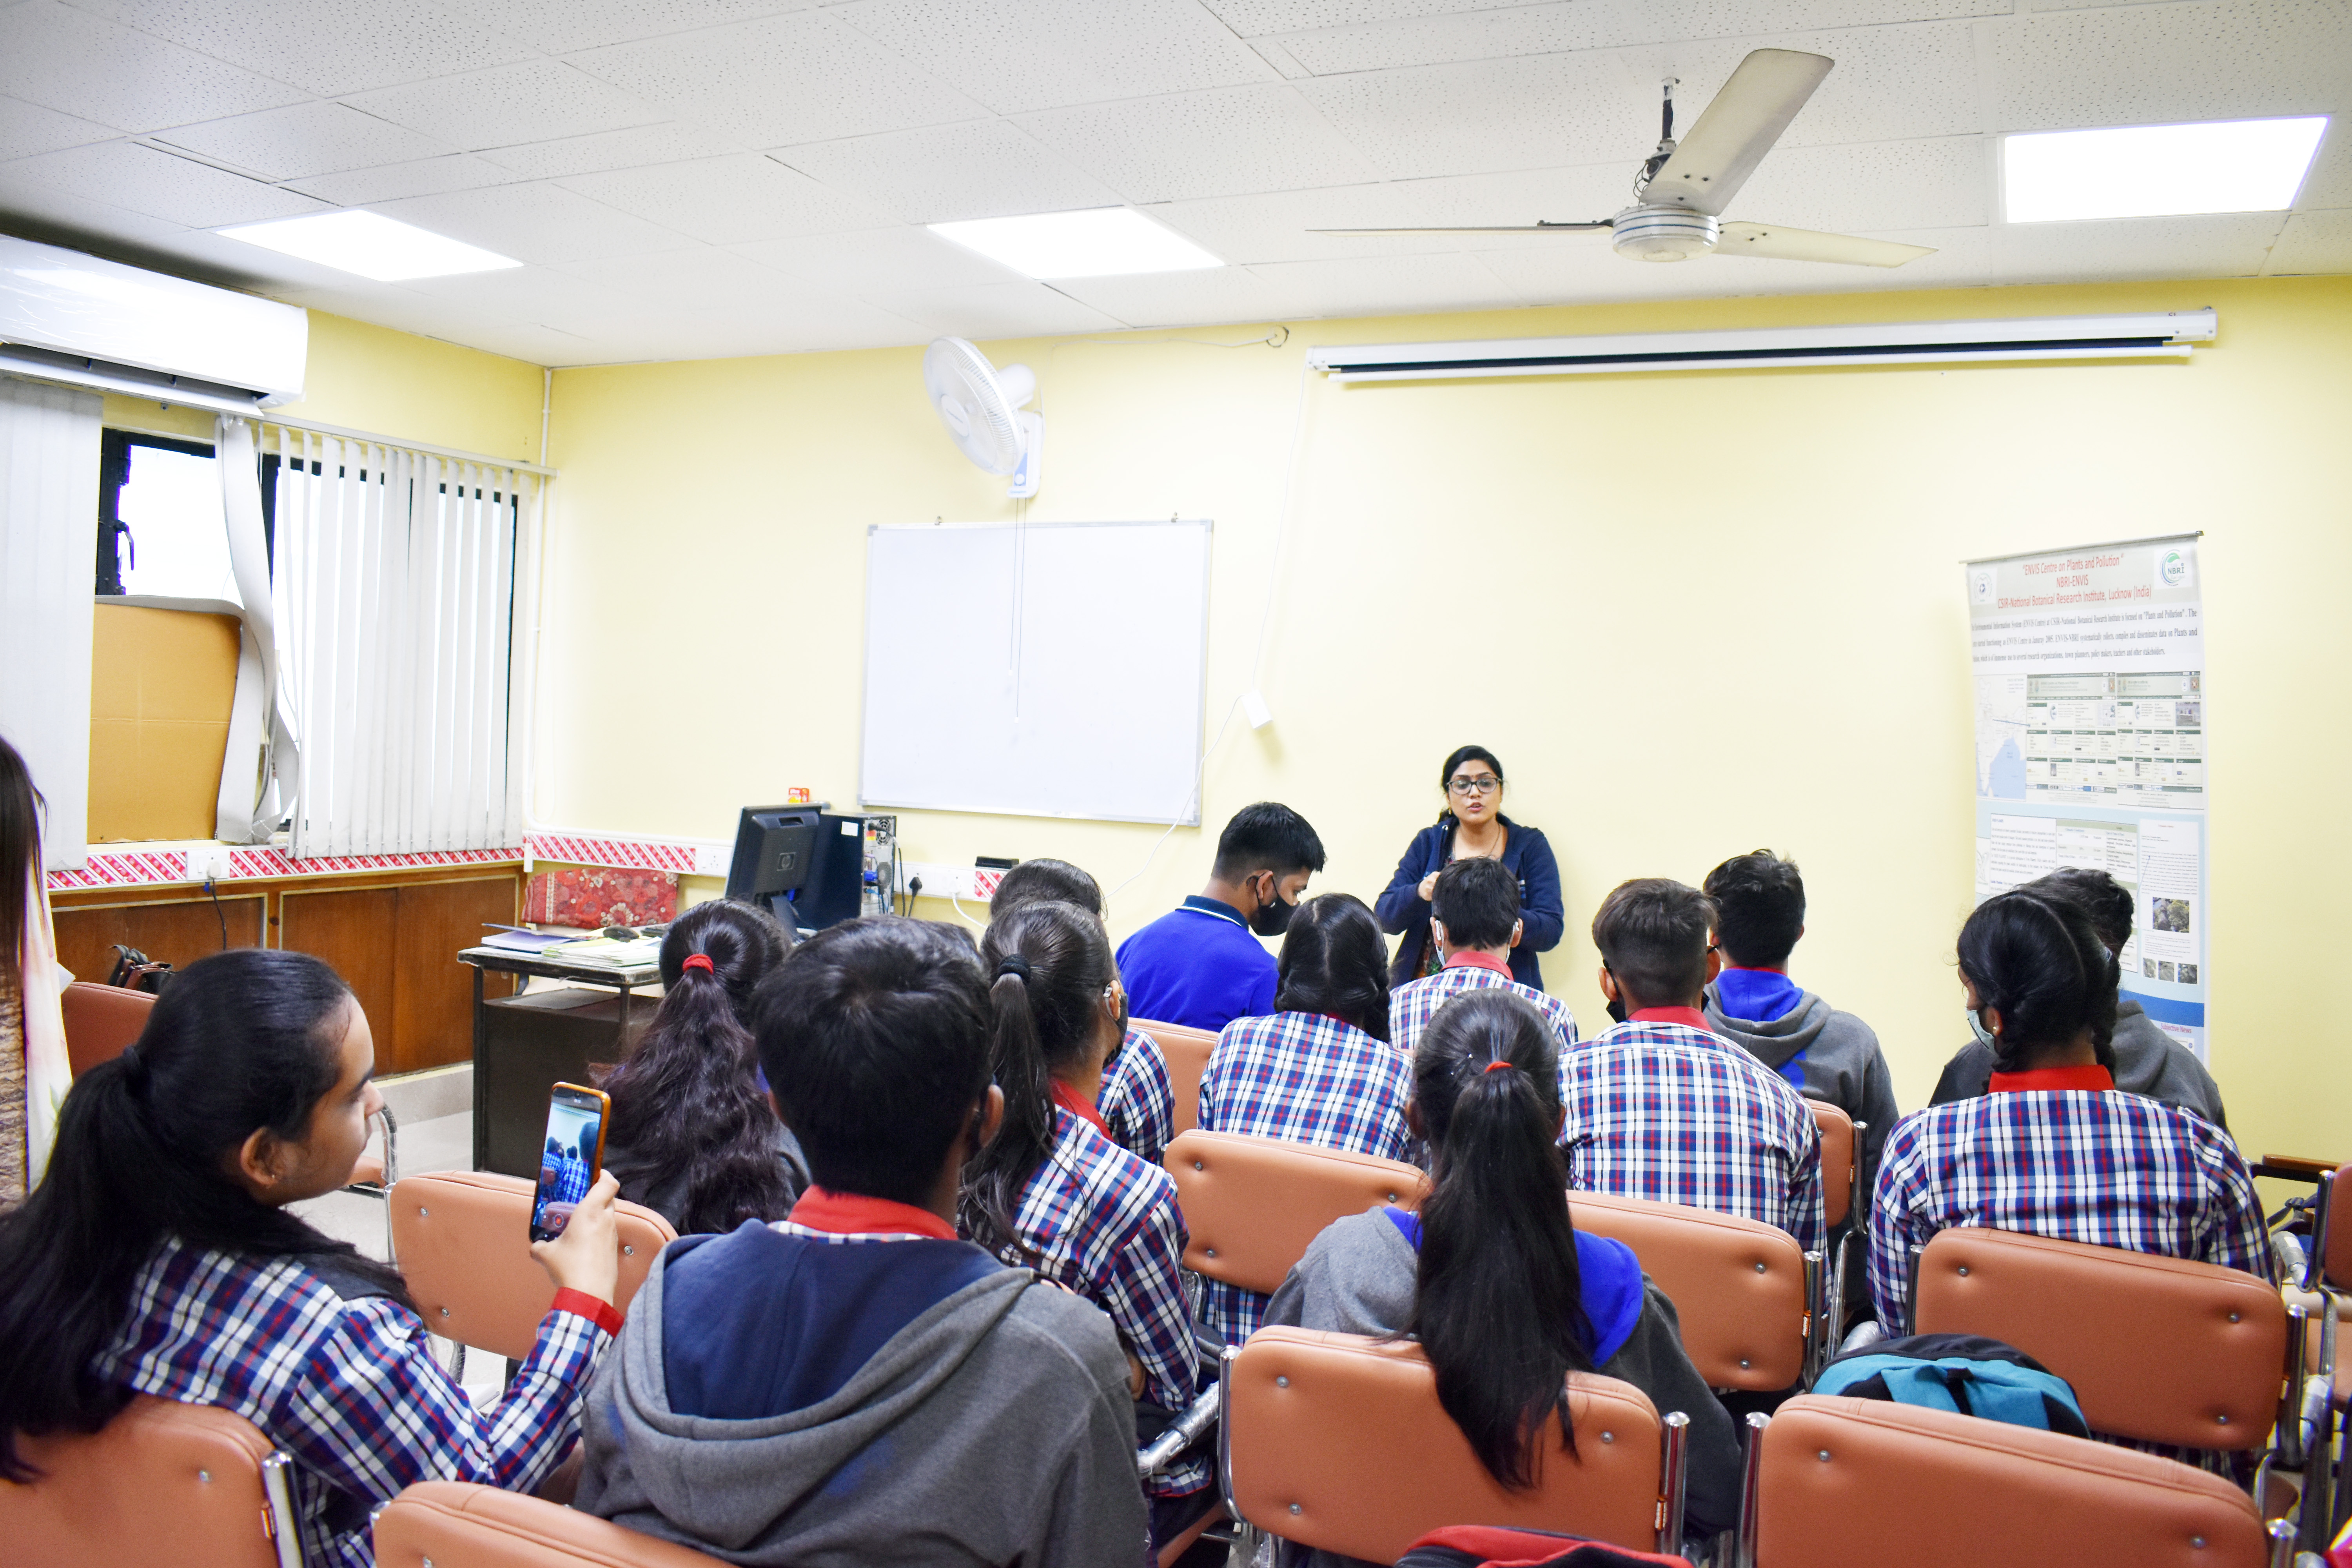 Interaction with students about ENVIS RP-NBRI-2022